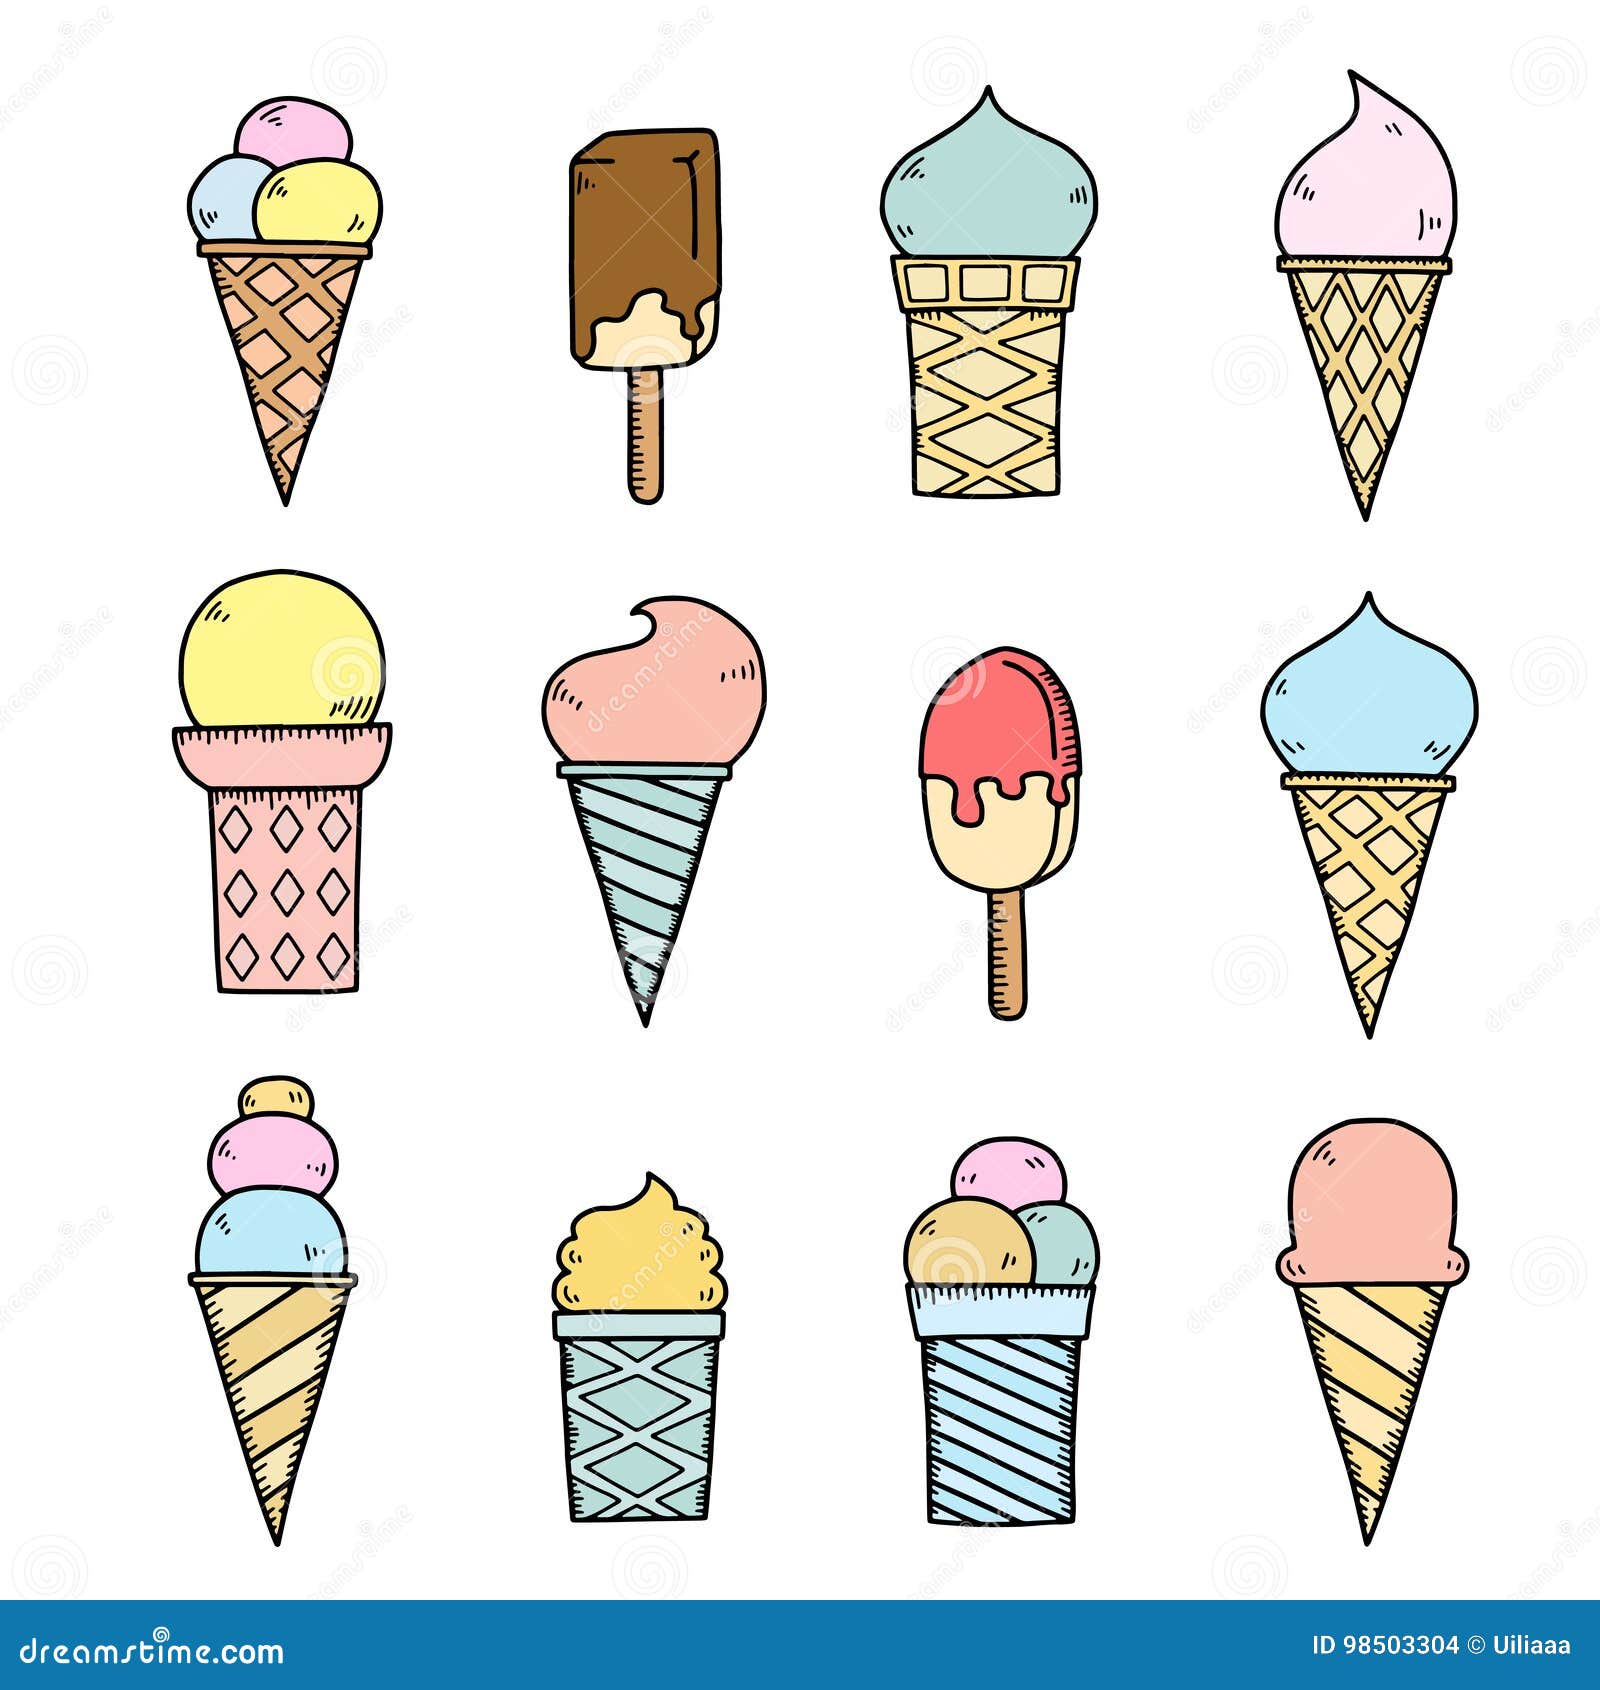 Ice Cream Drawing With Color - How to draw an ice cream cone. - Finaaseda